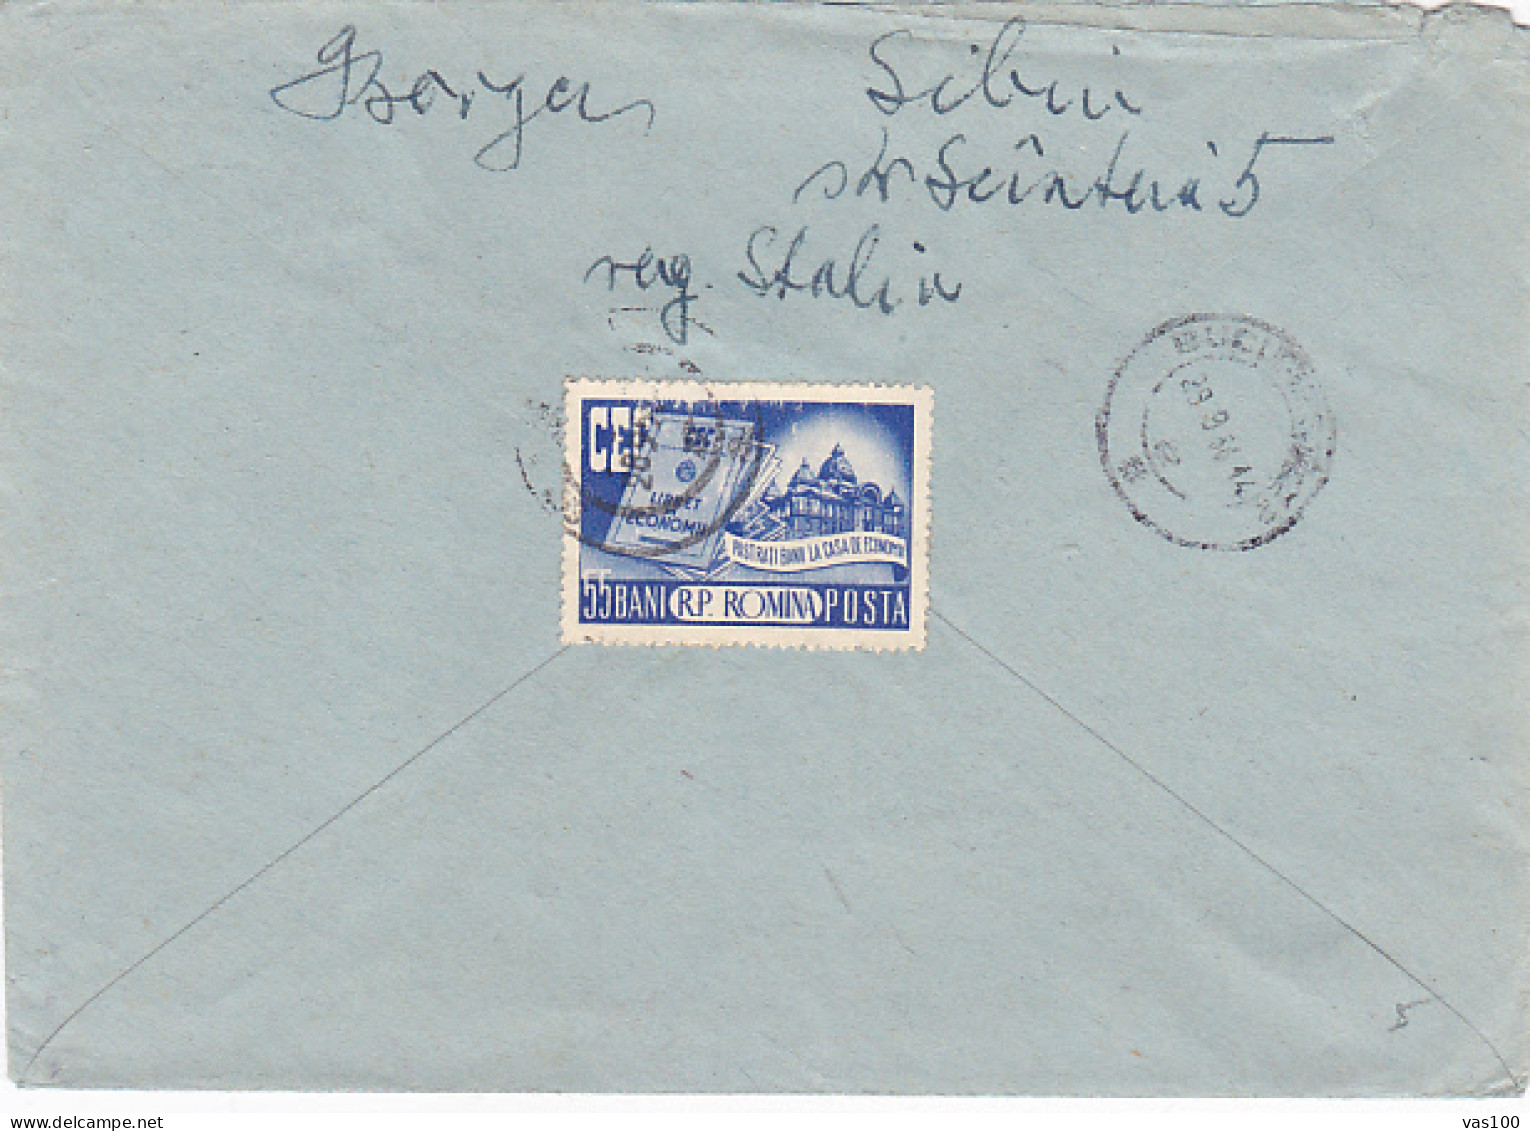 SAVINGS BANK ADVERTISING, STAMPS ON COVER, 1954, ROMANIA - Covers & Documents